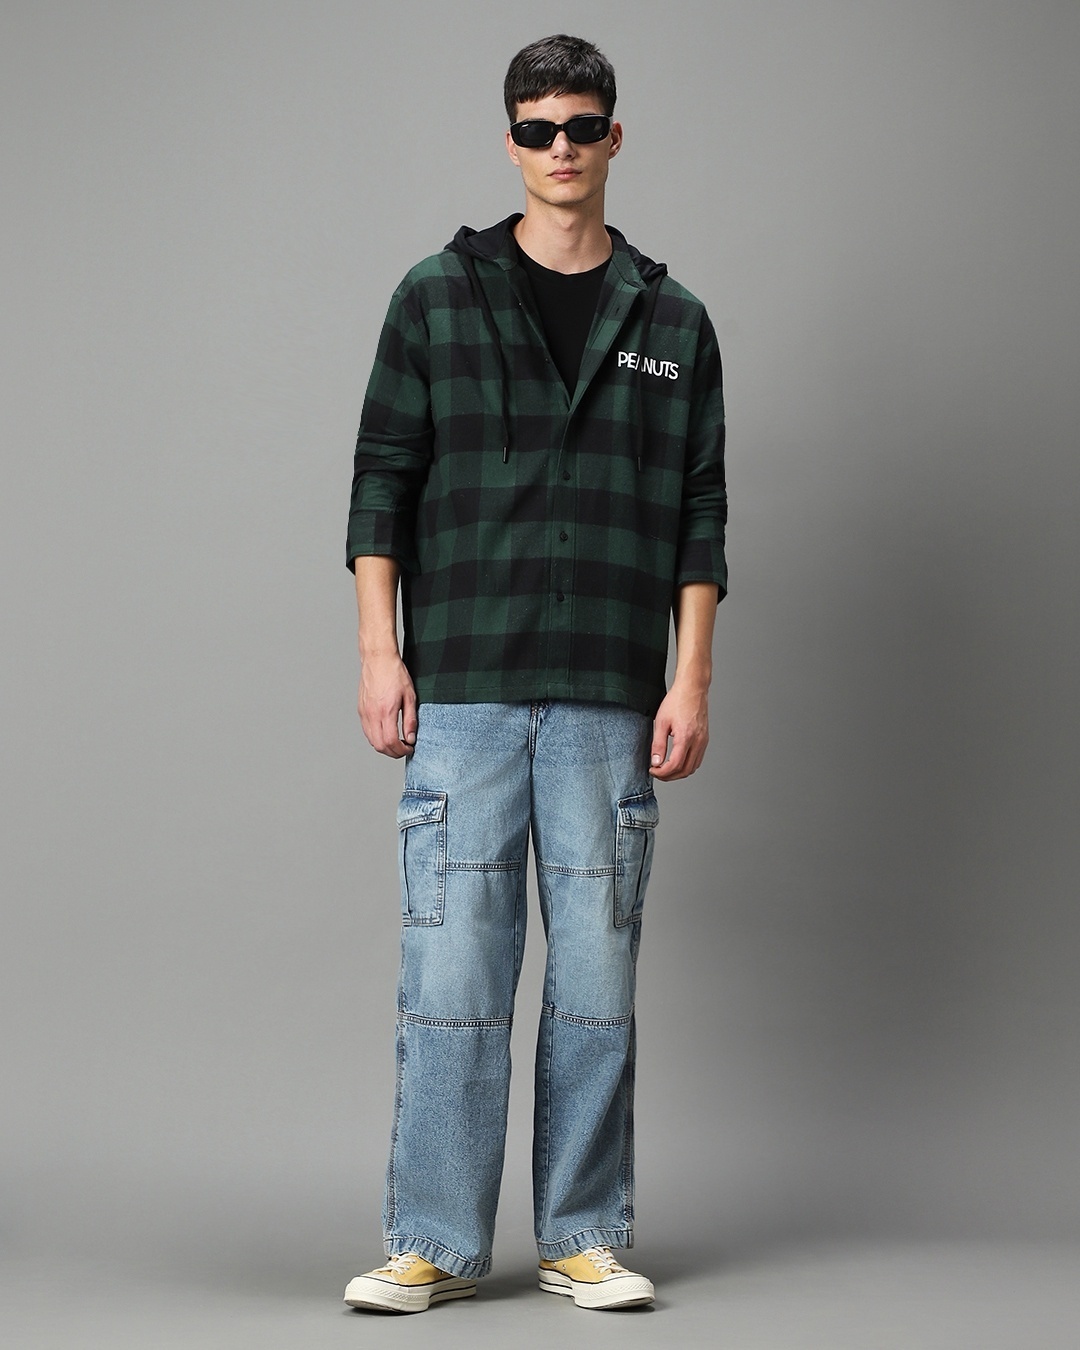 Men's Green & Black Snoopy Checked Oversized Hooded Shirt